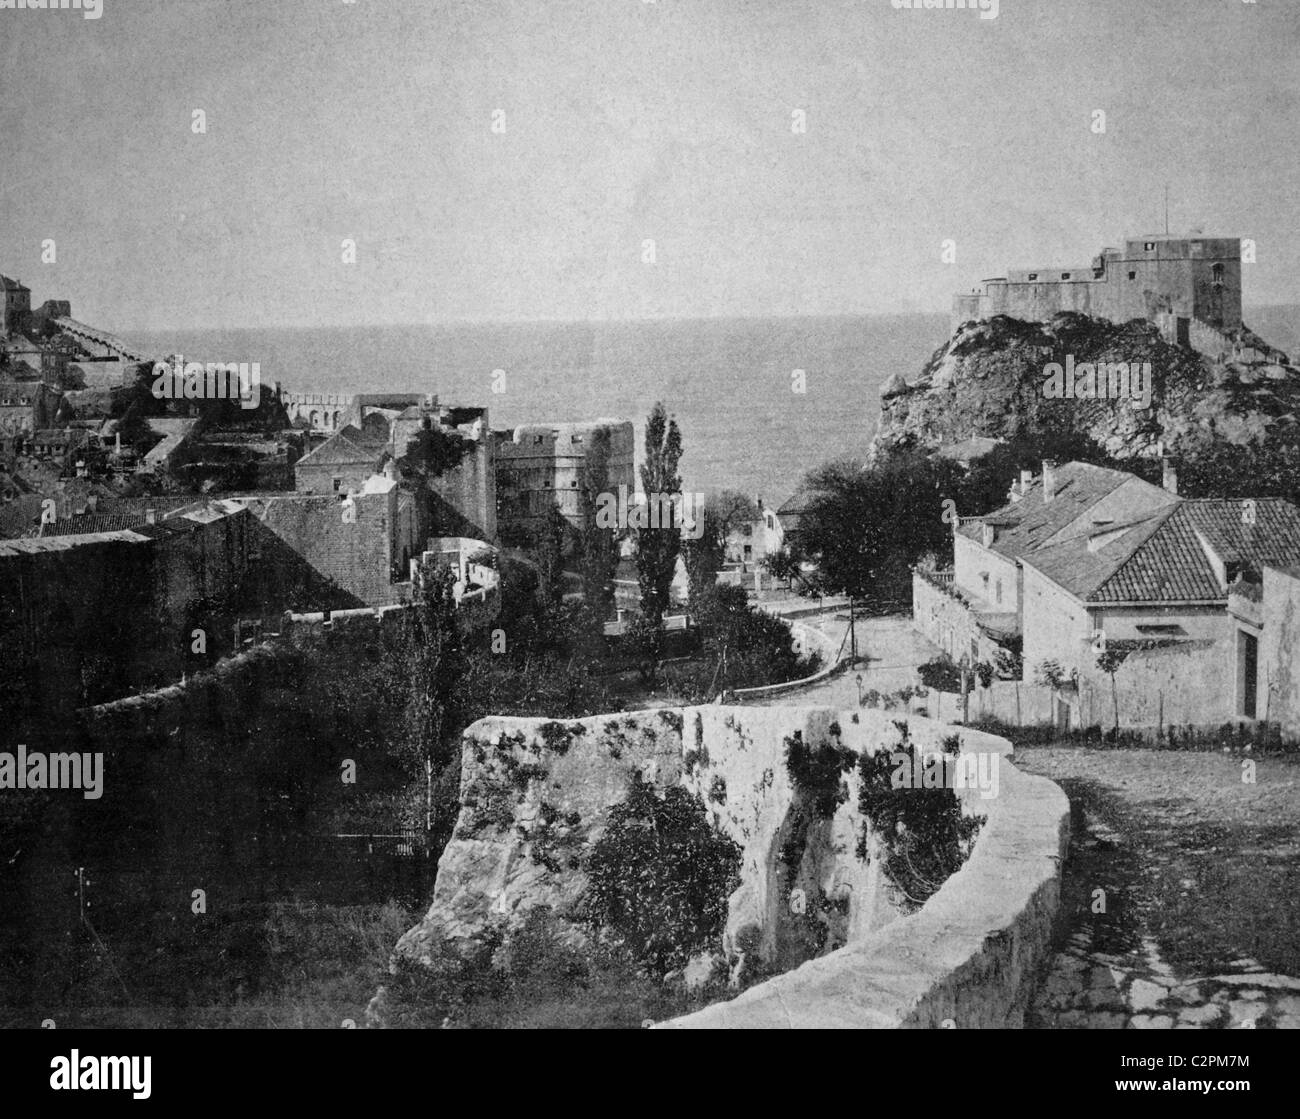 Early autotype of Ragusa, Dalmatia, historical picture, 1884 Stock Photo